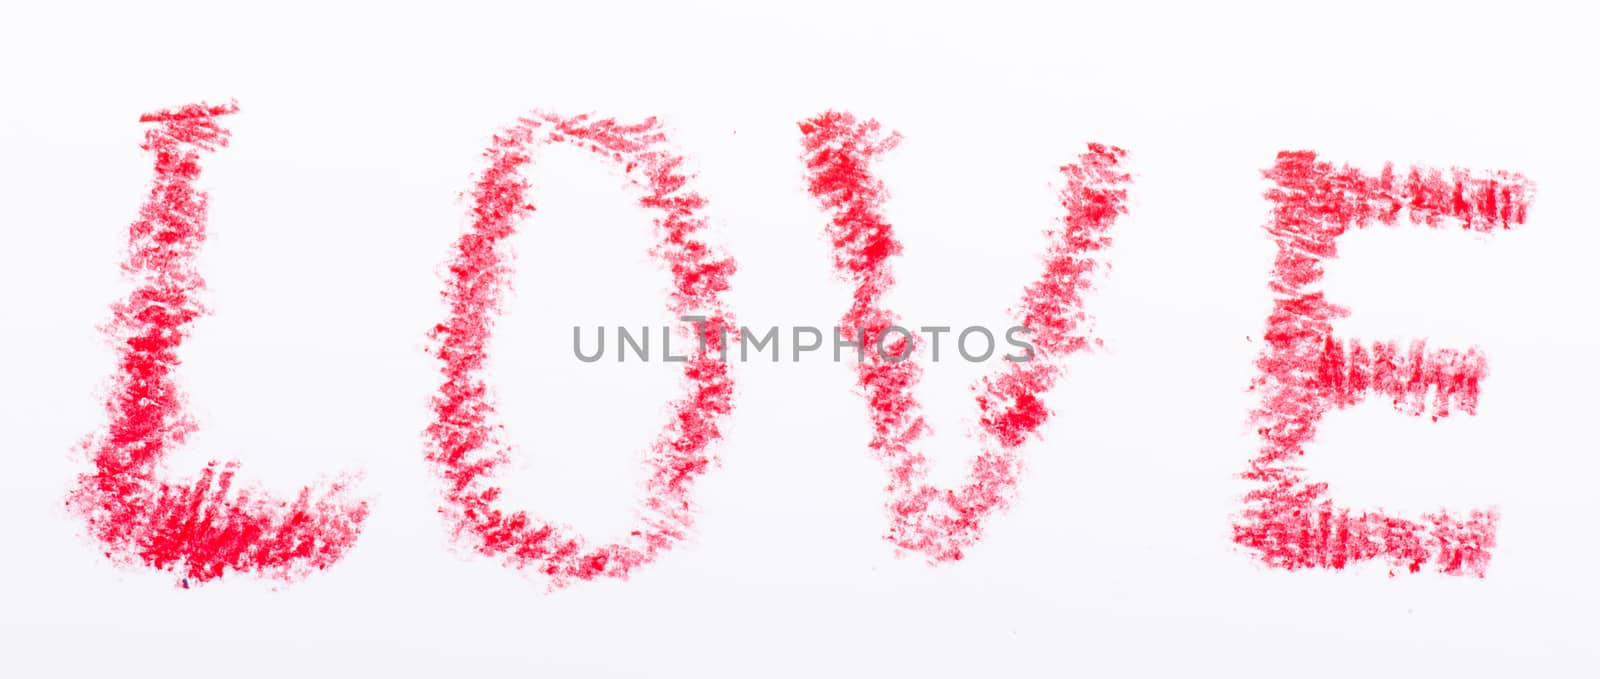 Pencil drawn love word with red color by marius_dragne